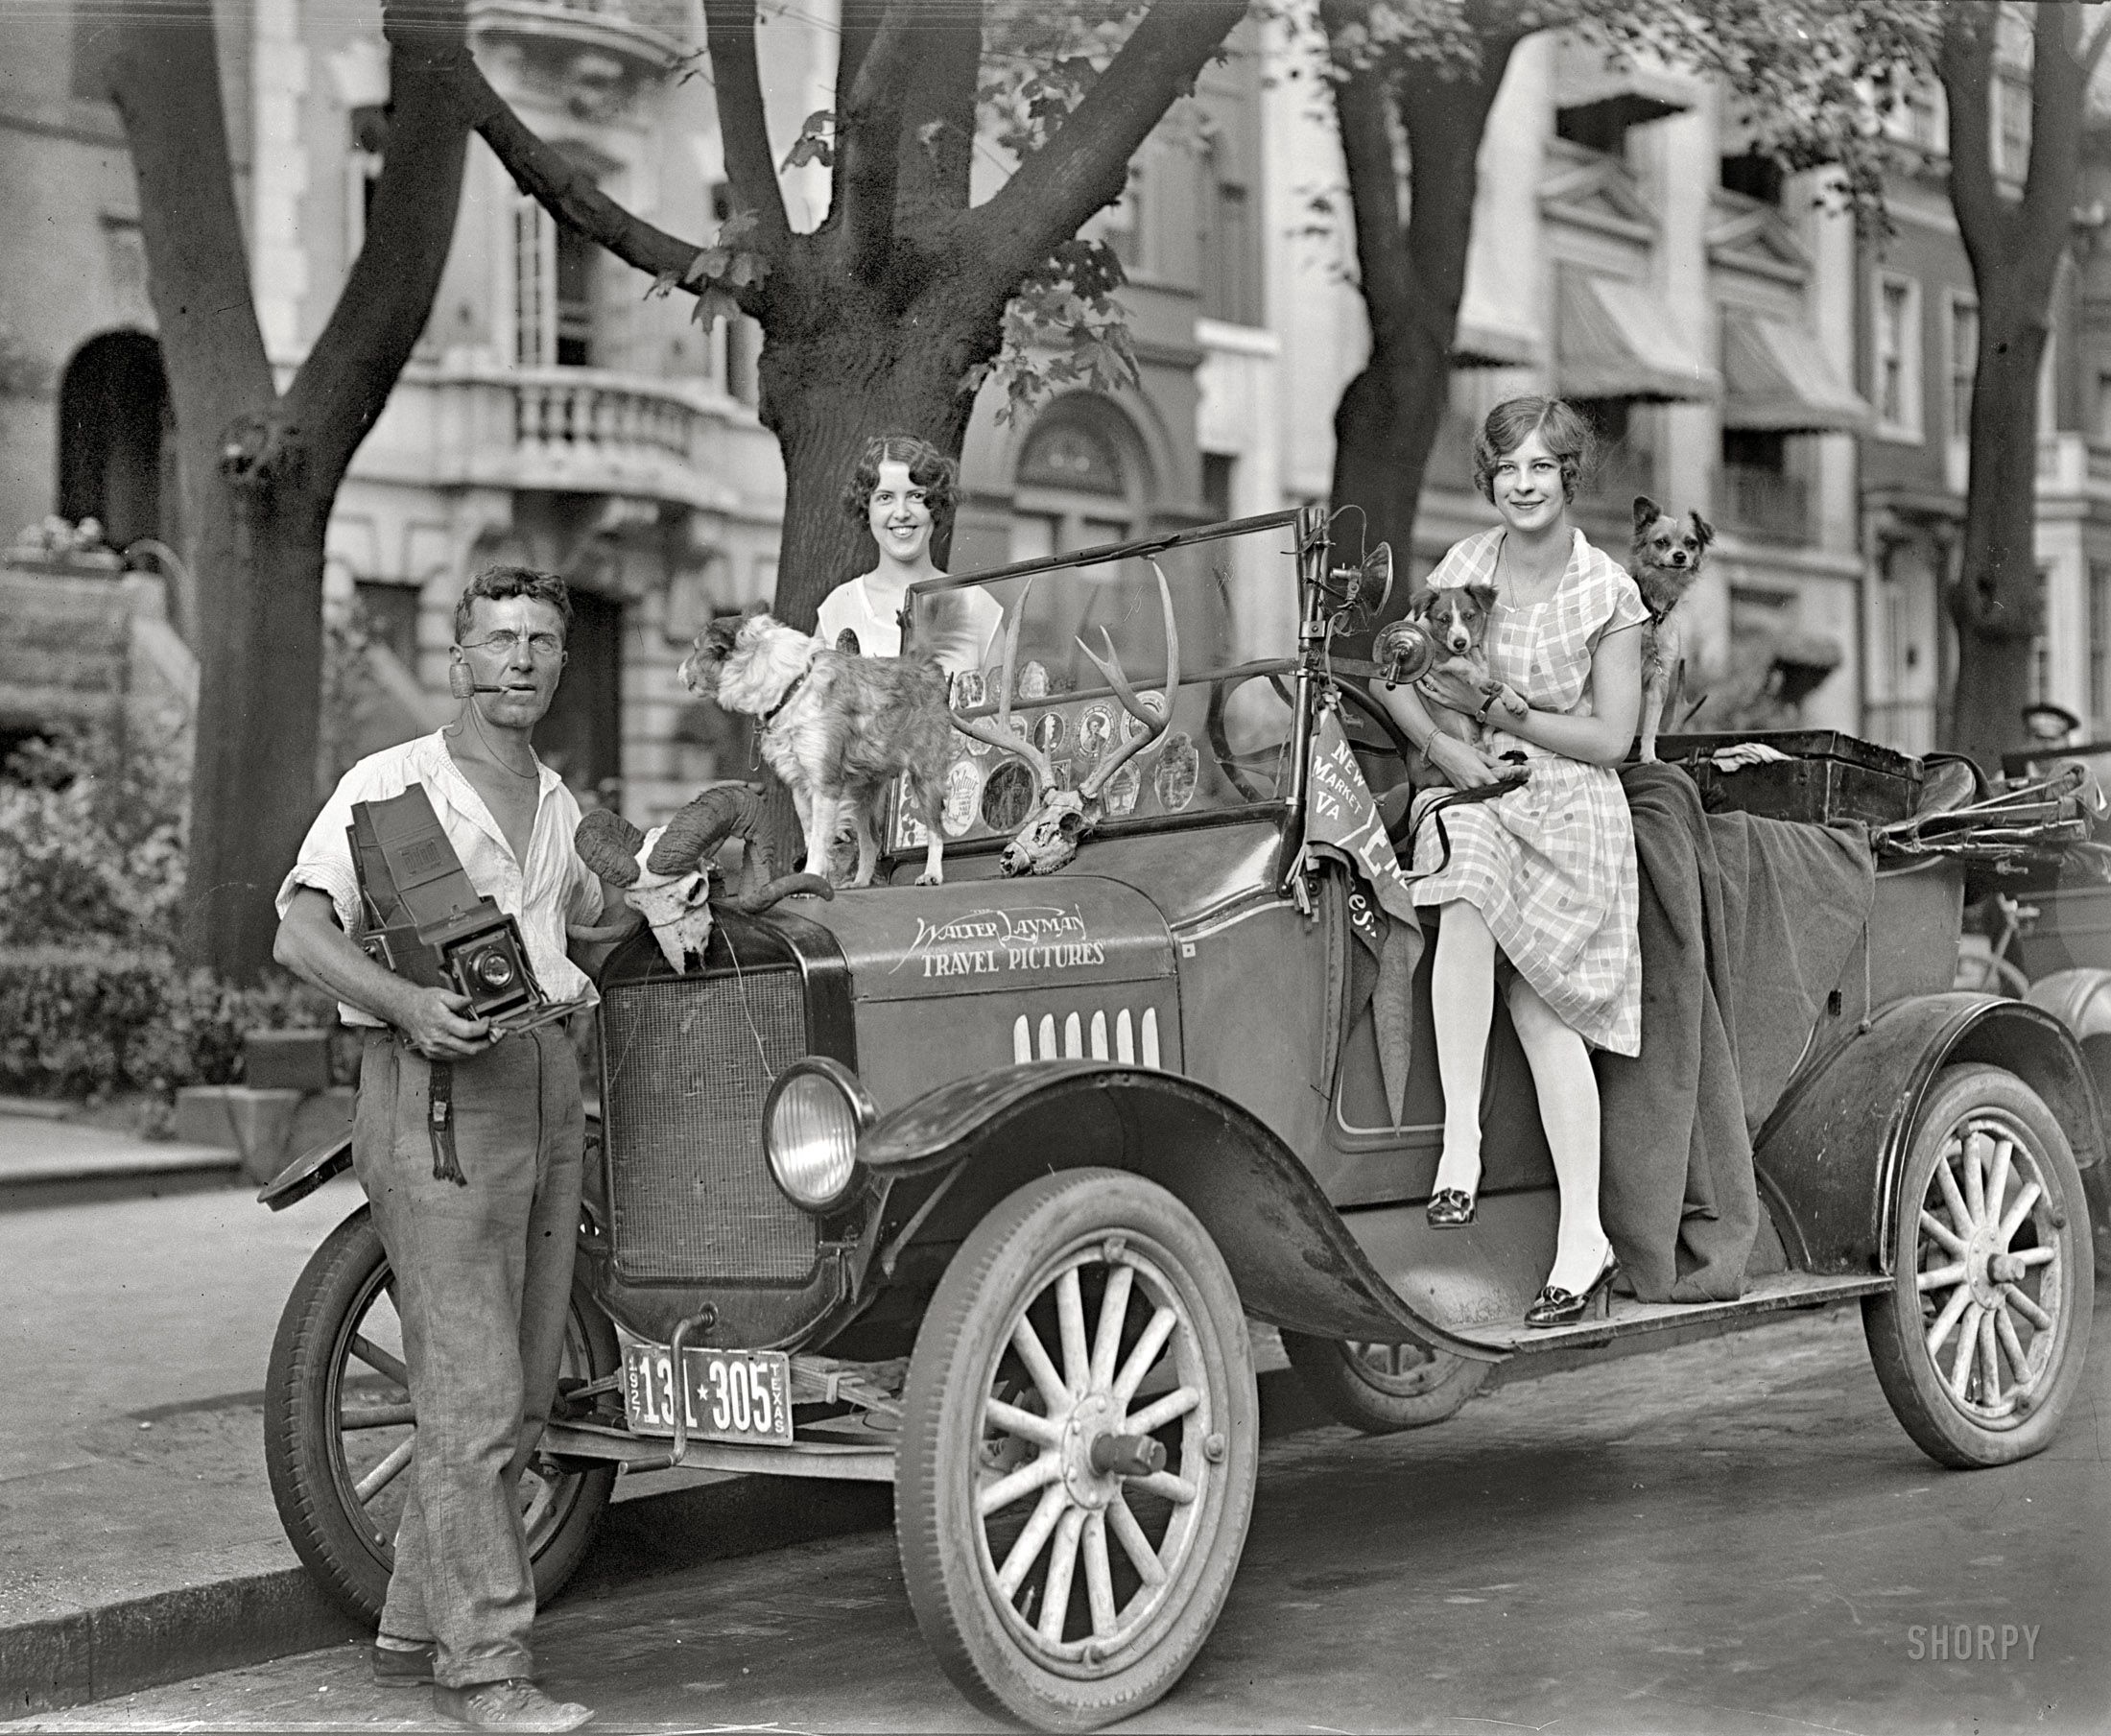 Washington, D.C., circa 1927. "Nature Magazine -- Walter Layman." Traveling the country with his dog Little Pocahontas, Walter Layman documented Native American culture  with photographs that appeared in magazines including National Geographic and Nature. National Photo glass negative. View full size.